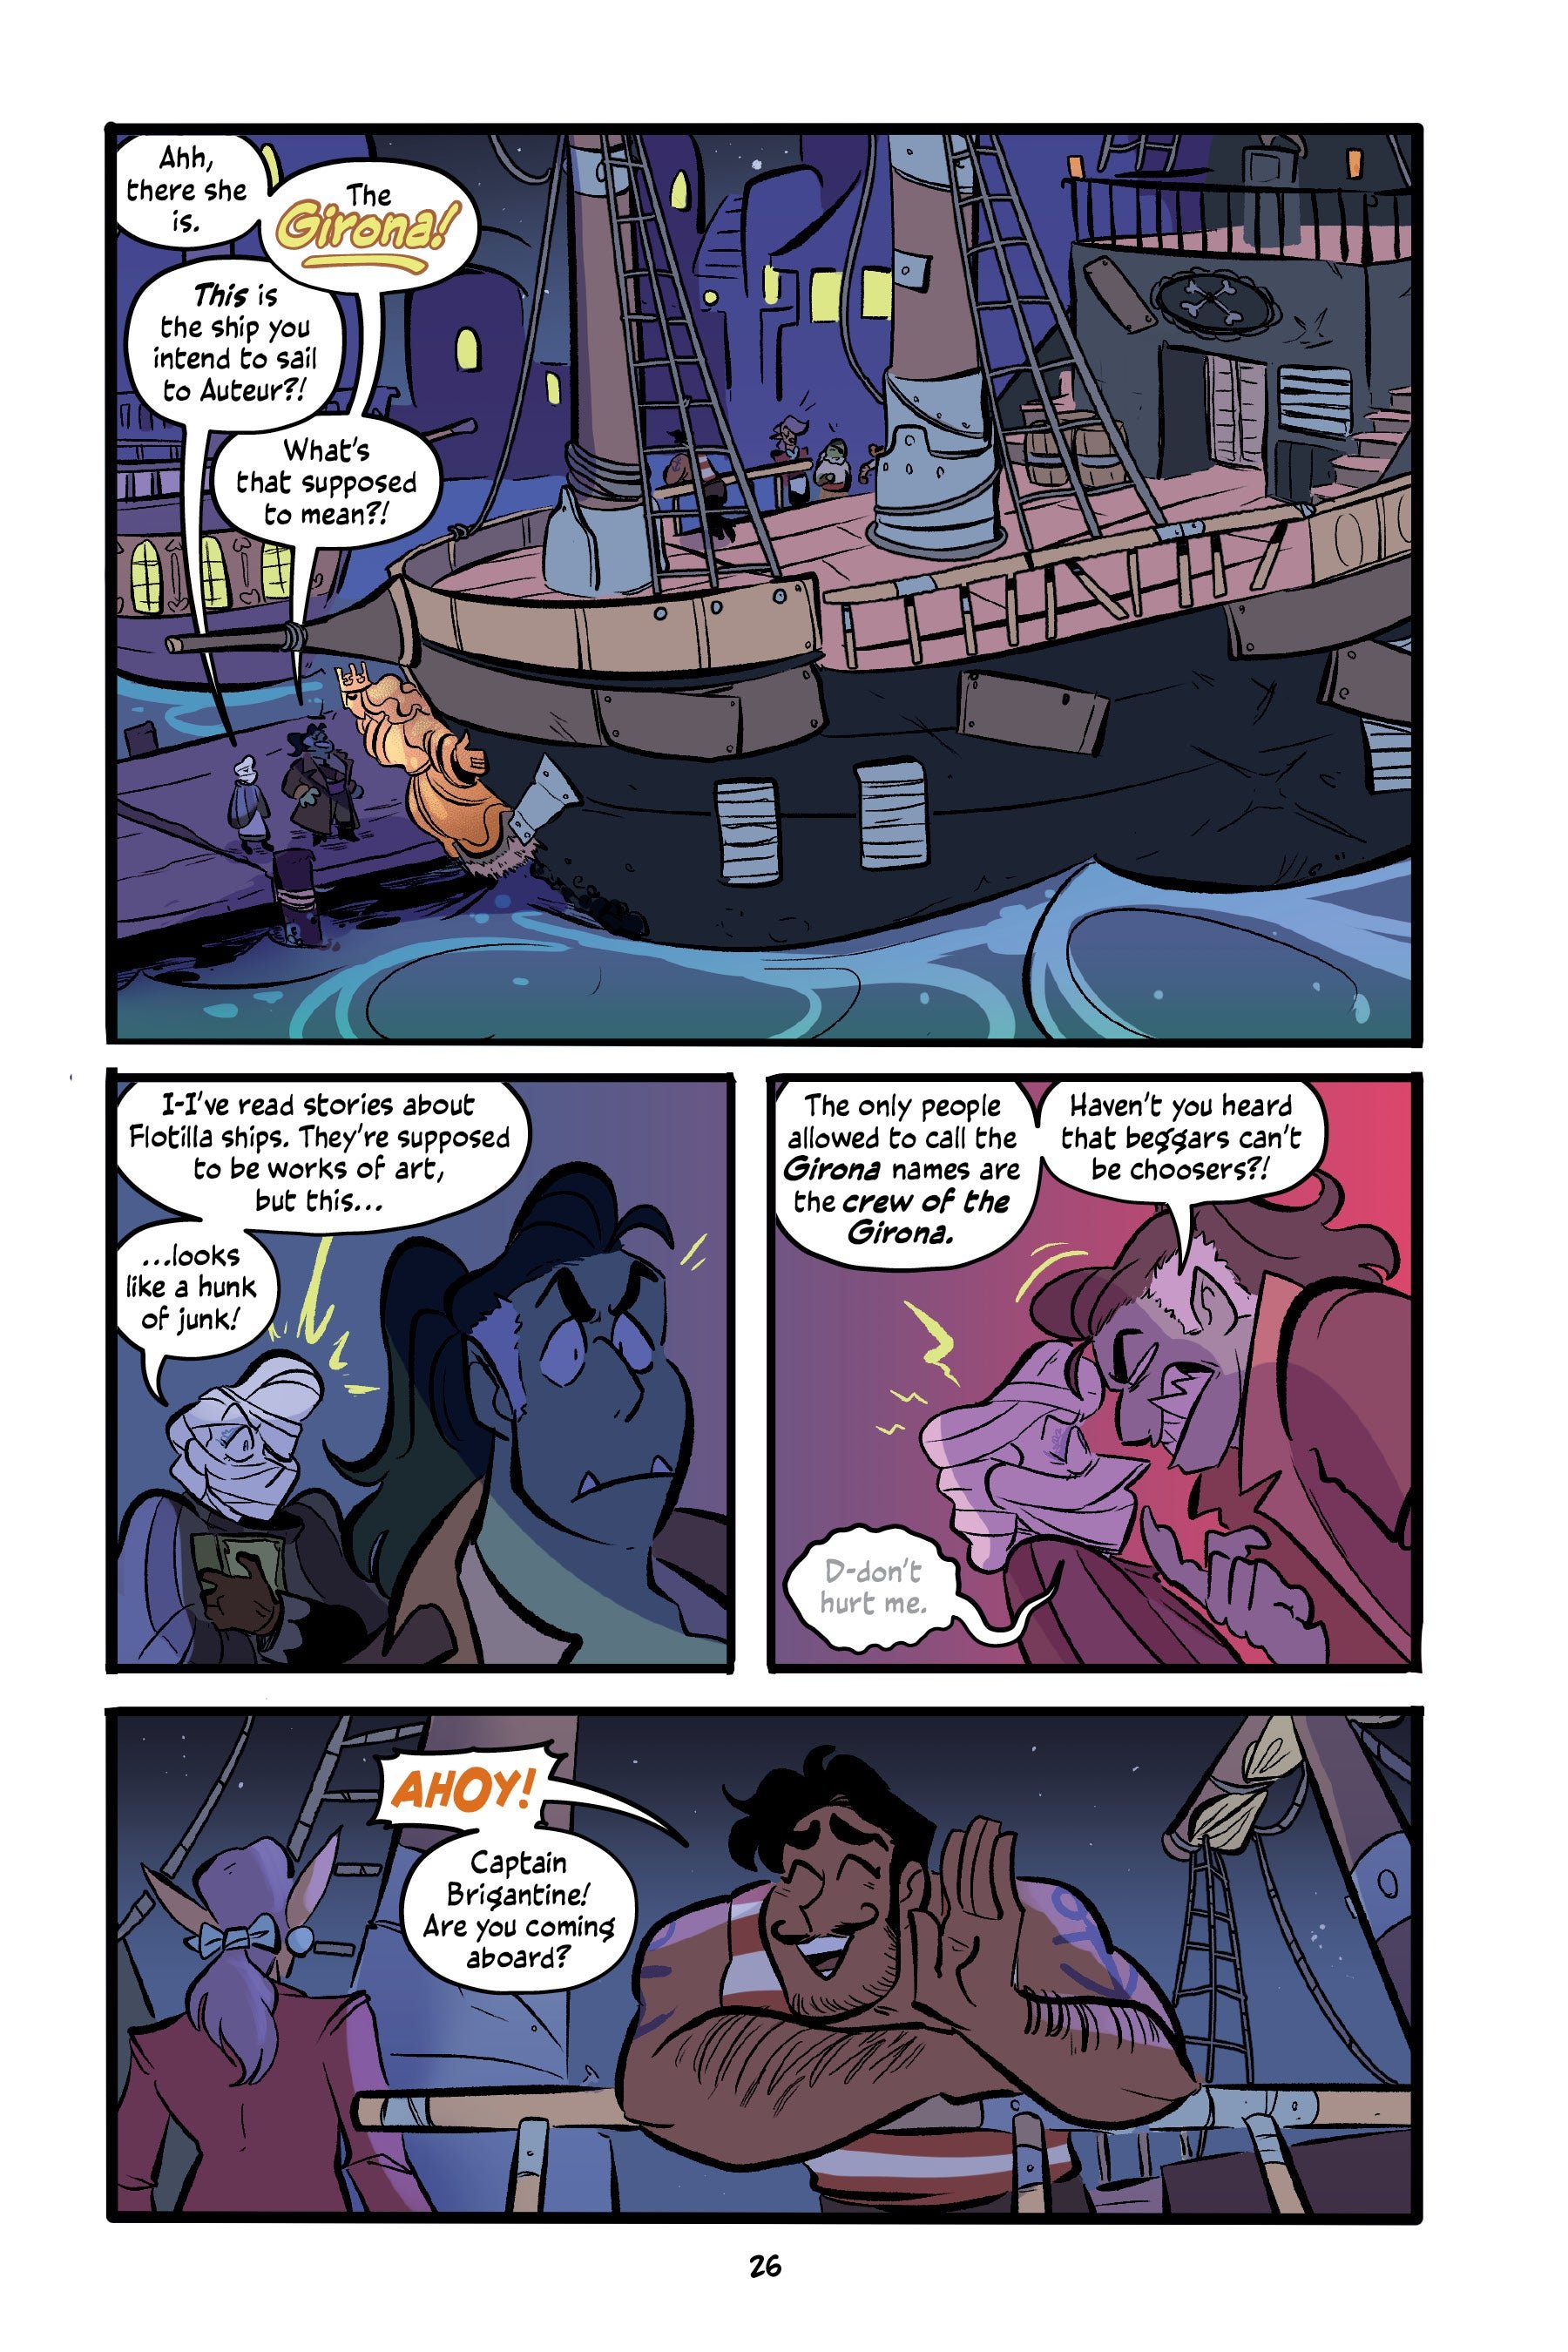 Internal comics page from The Pirate and the Porcelain Girl